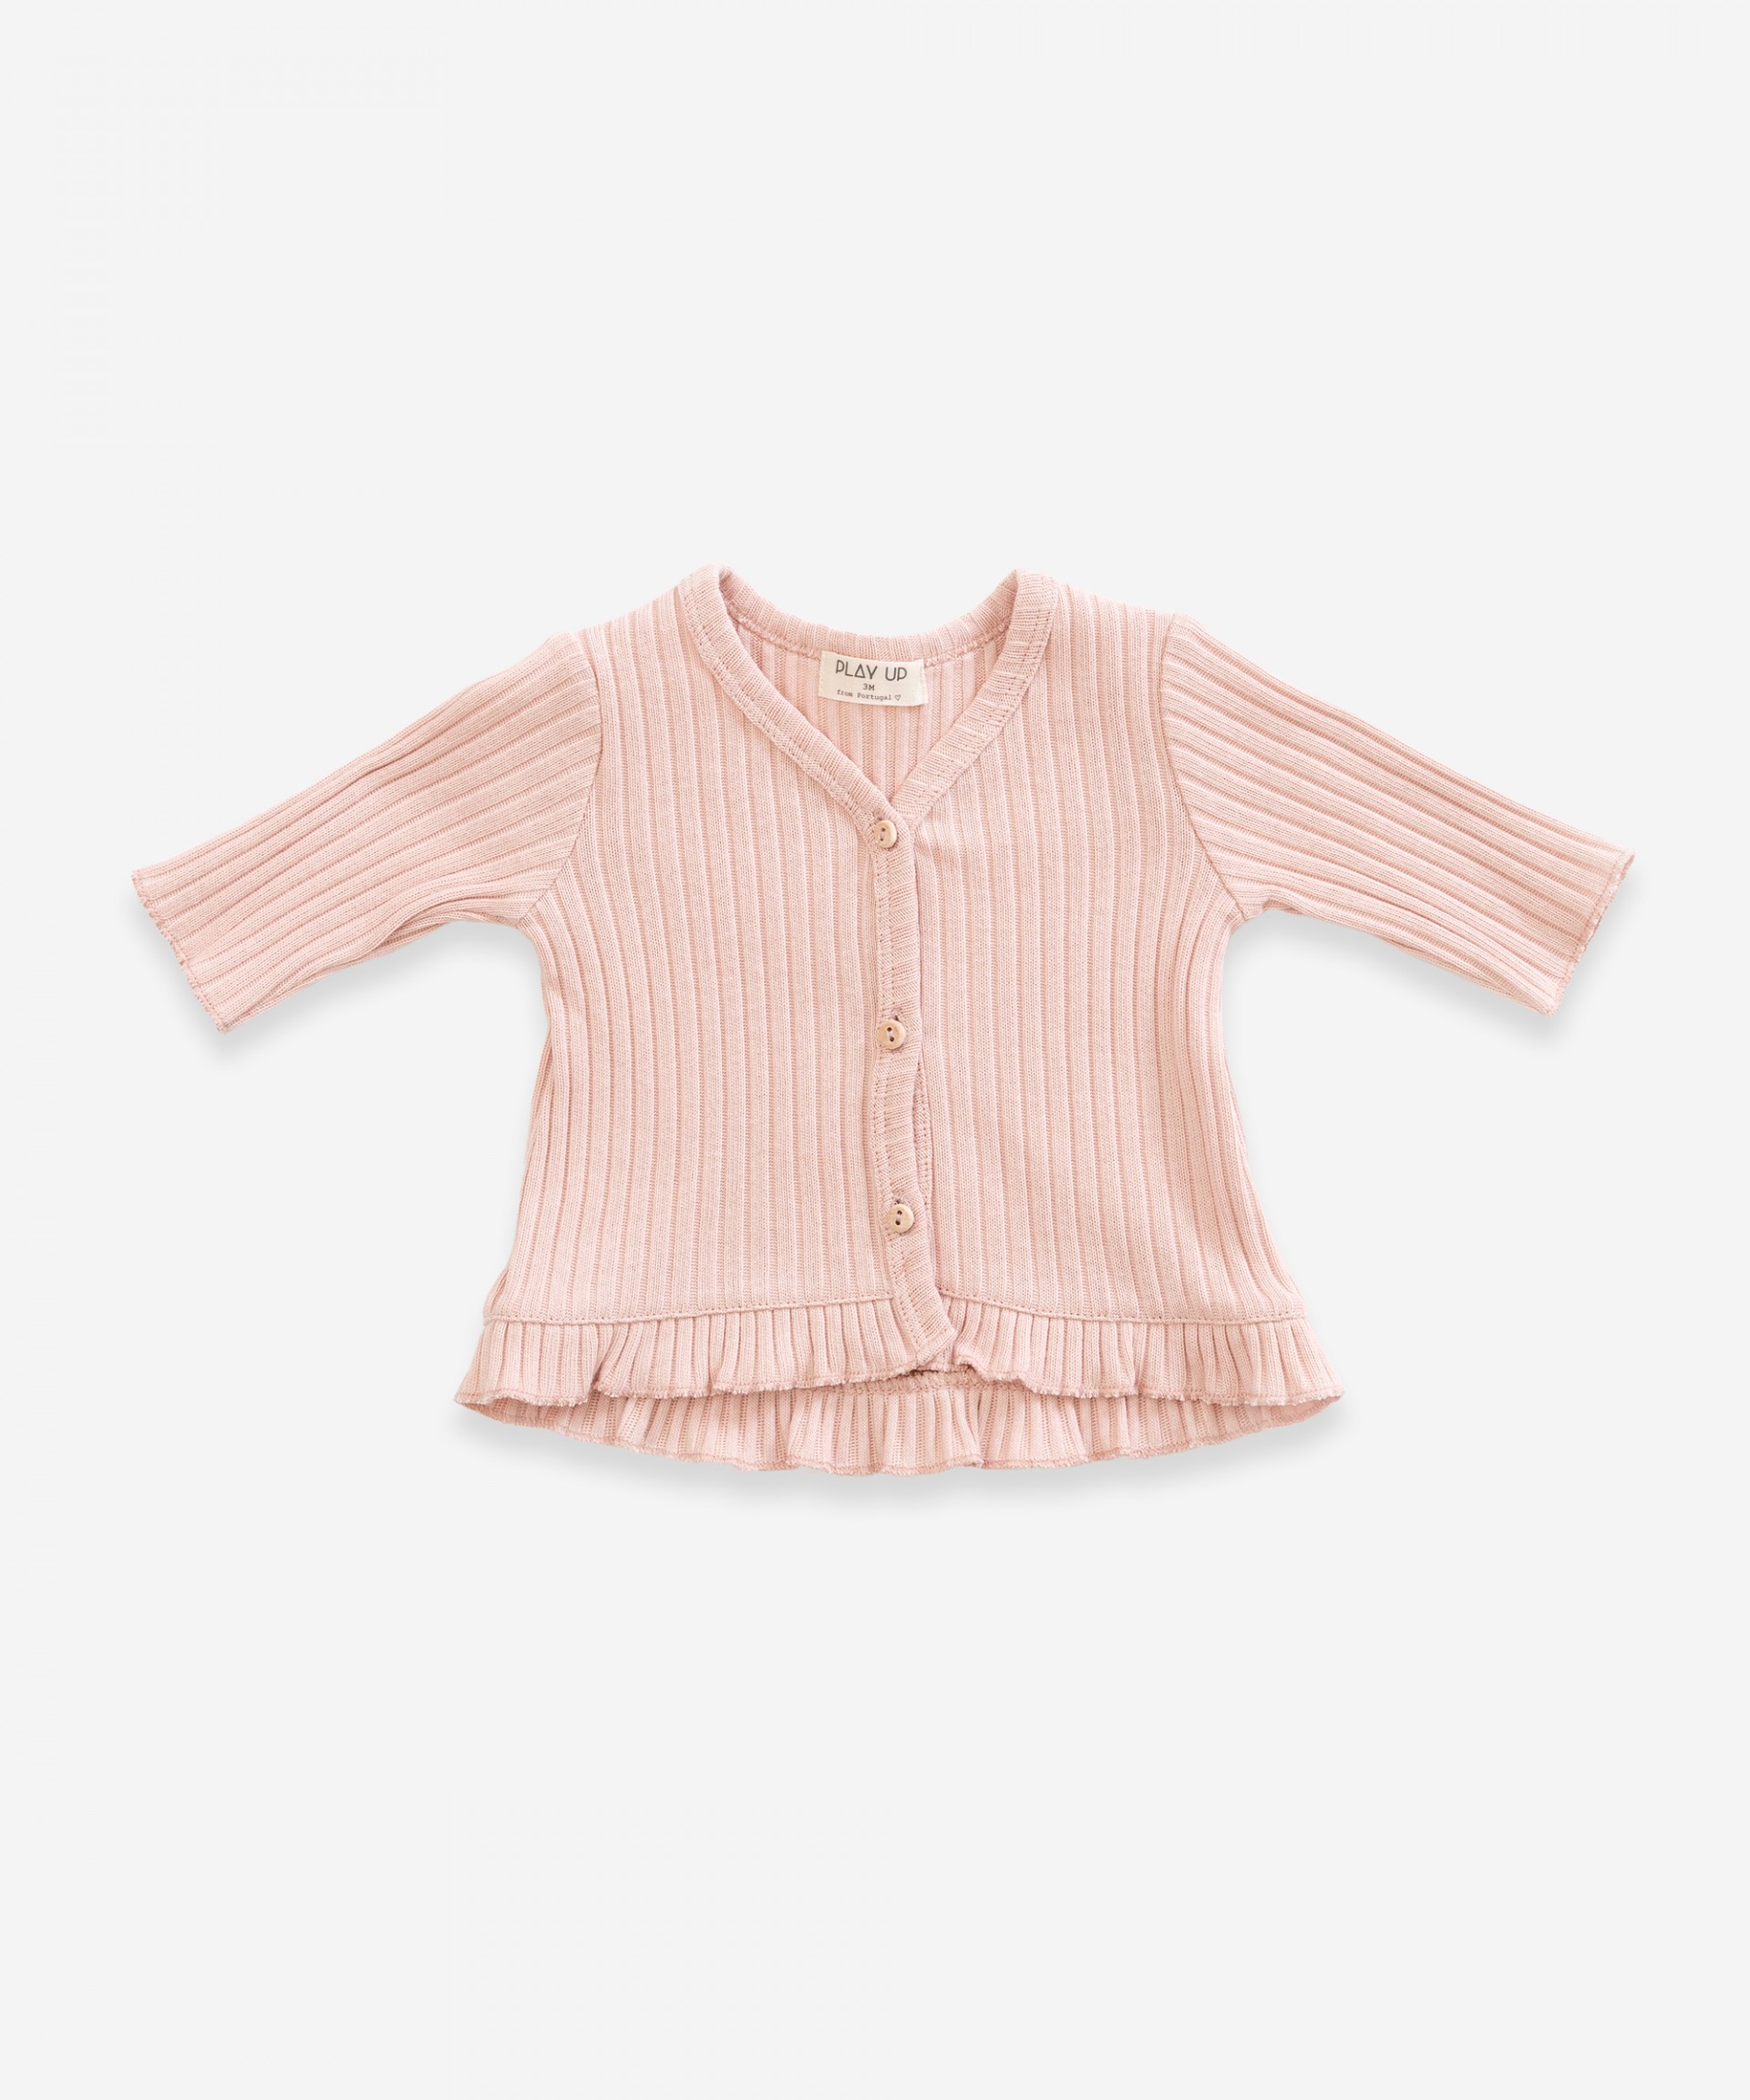 Cardigan with frill | Weaving